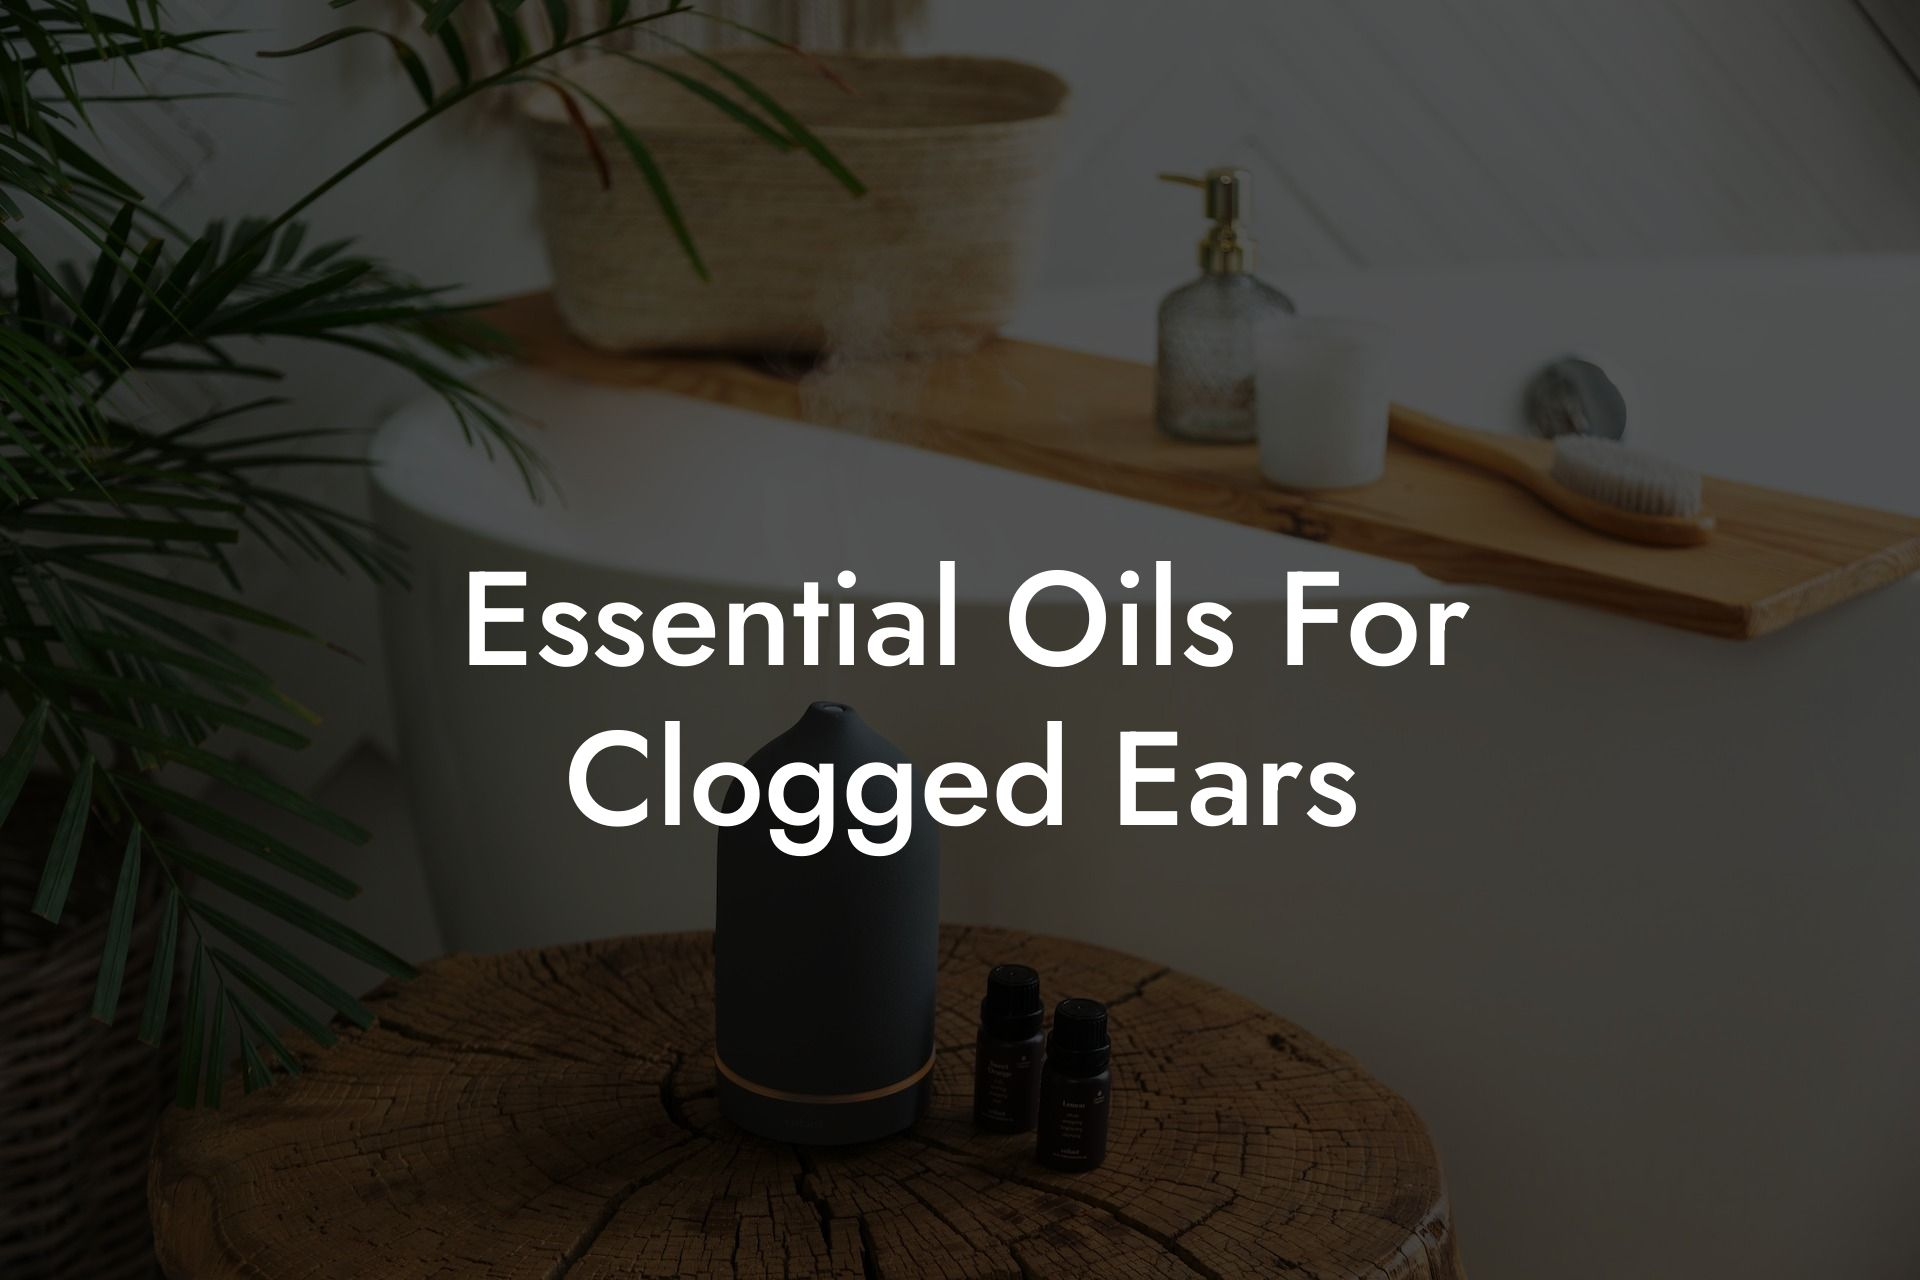 Essential Oils For Clogged Ears